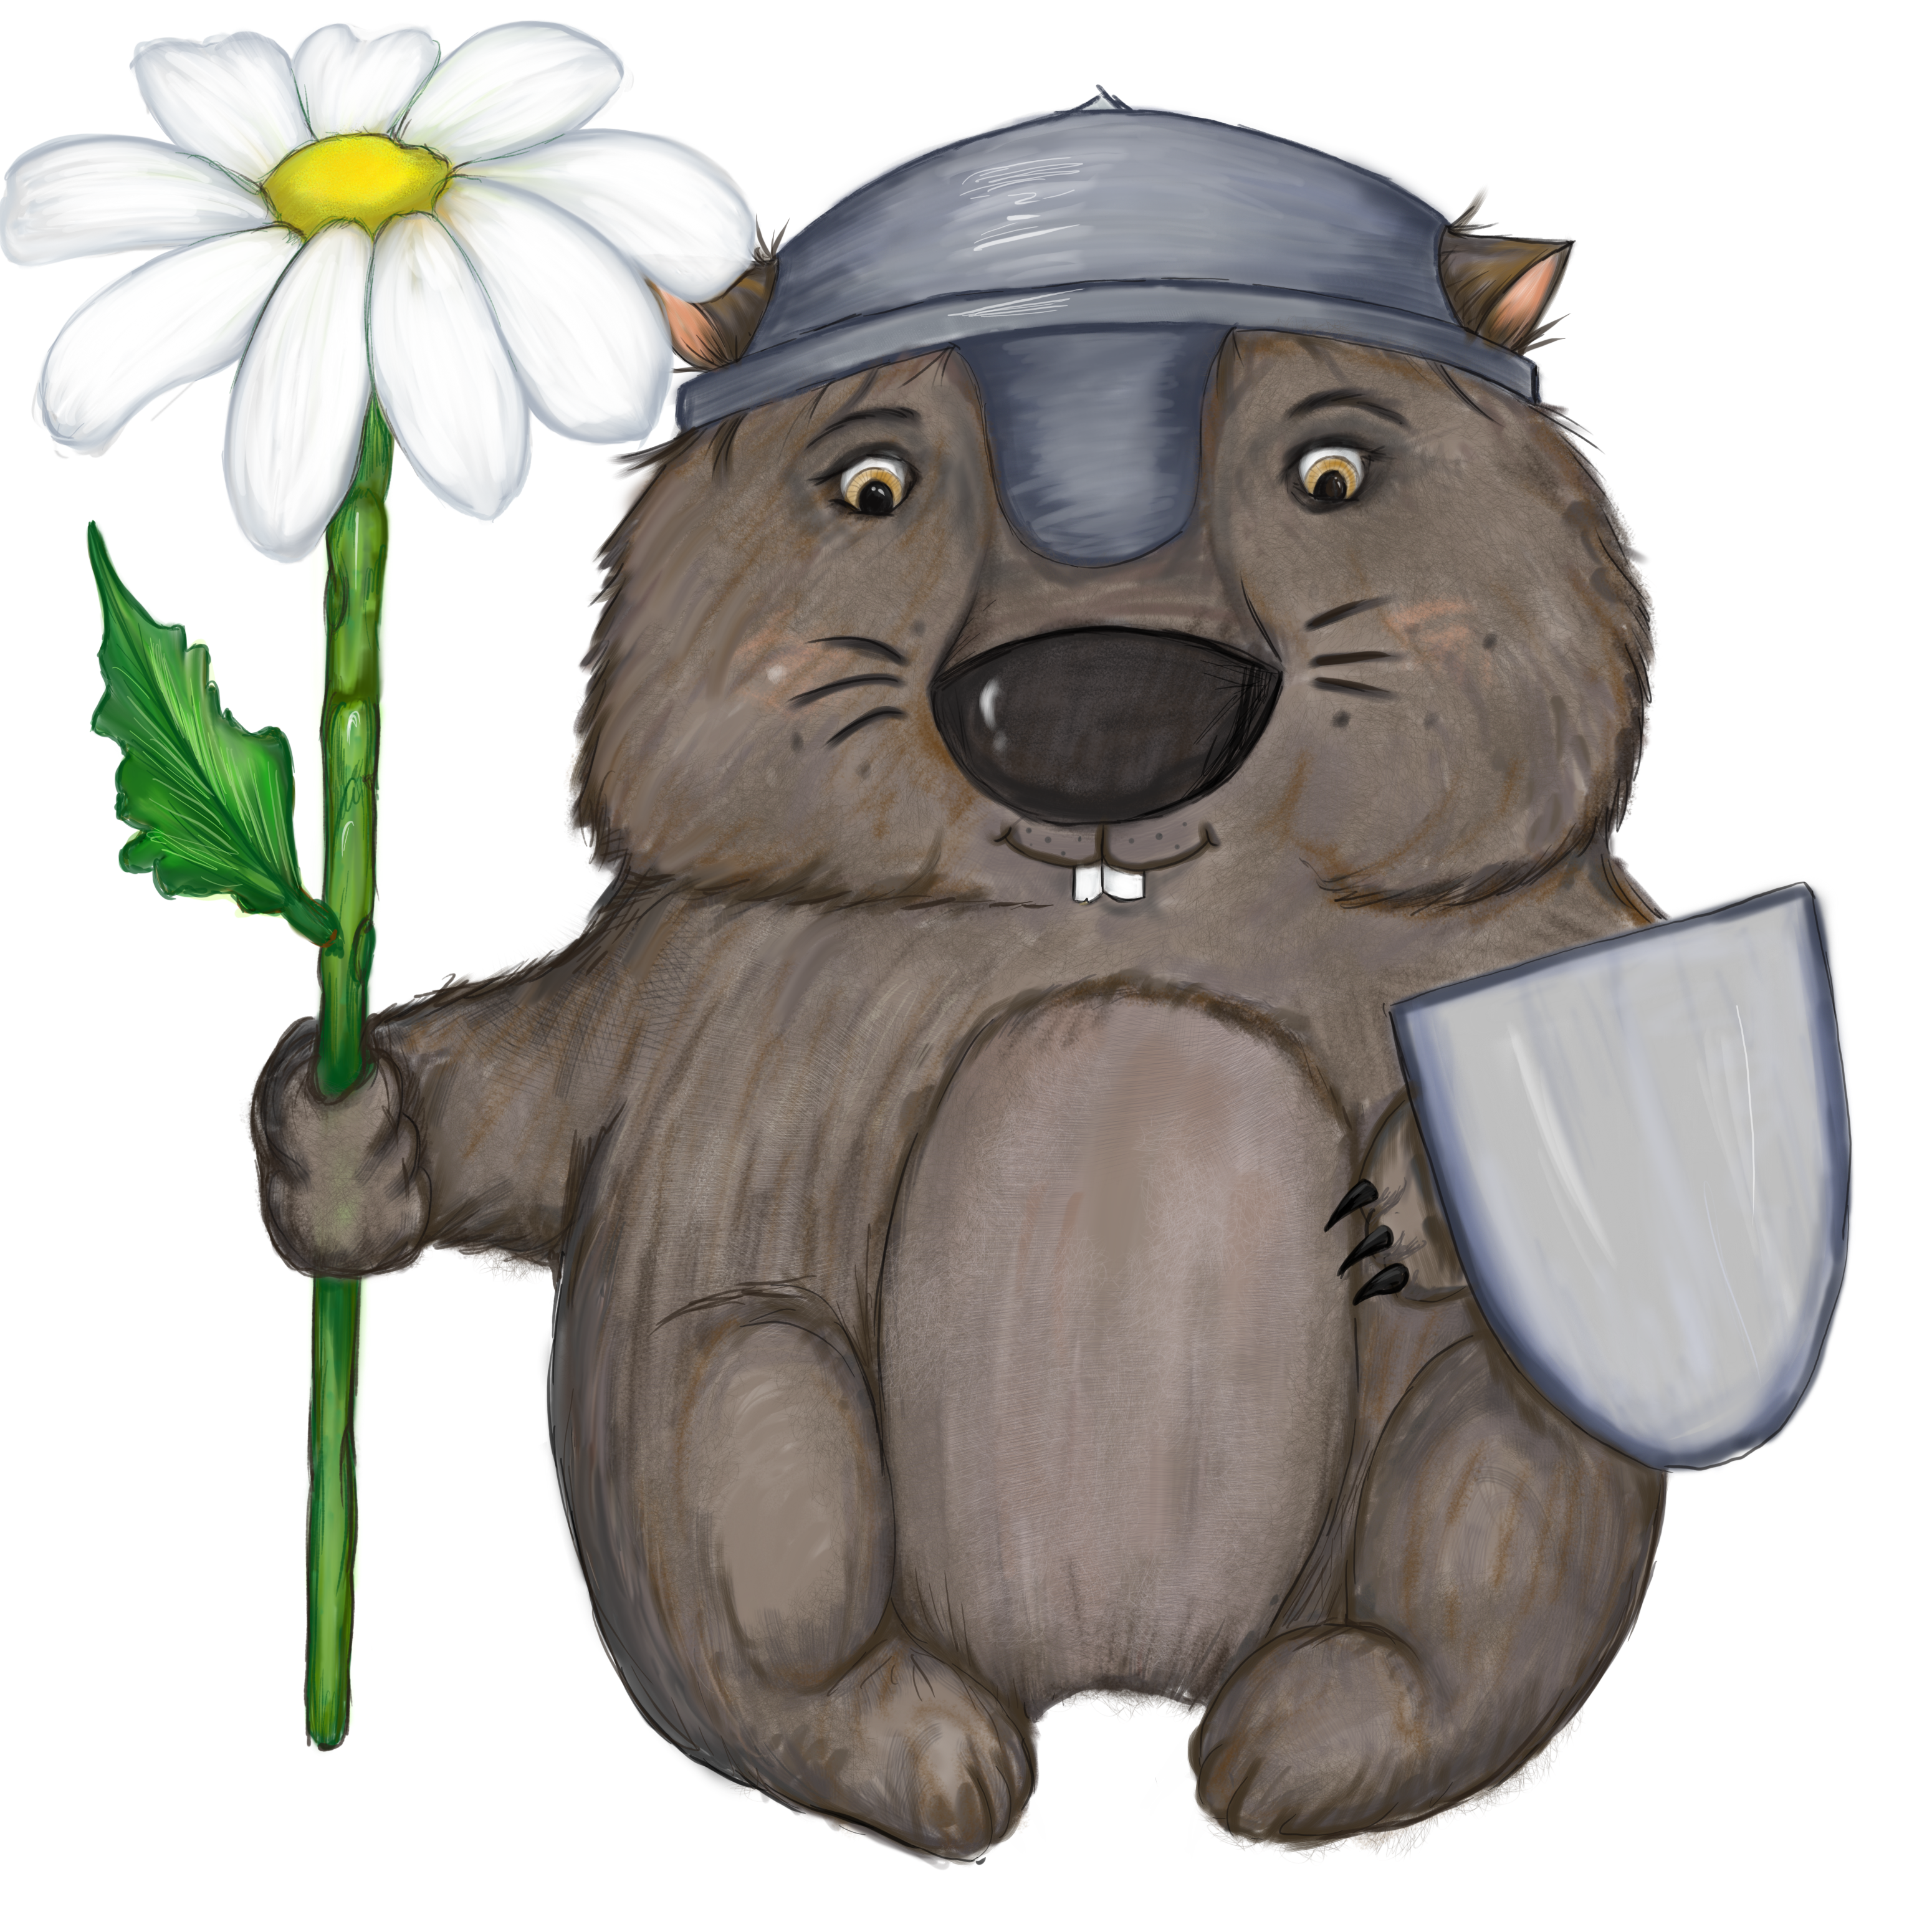 Image of wombat wearing crusader helmet. In one paw he has a flower. In the other her holds a shield.